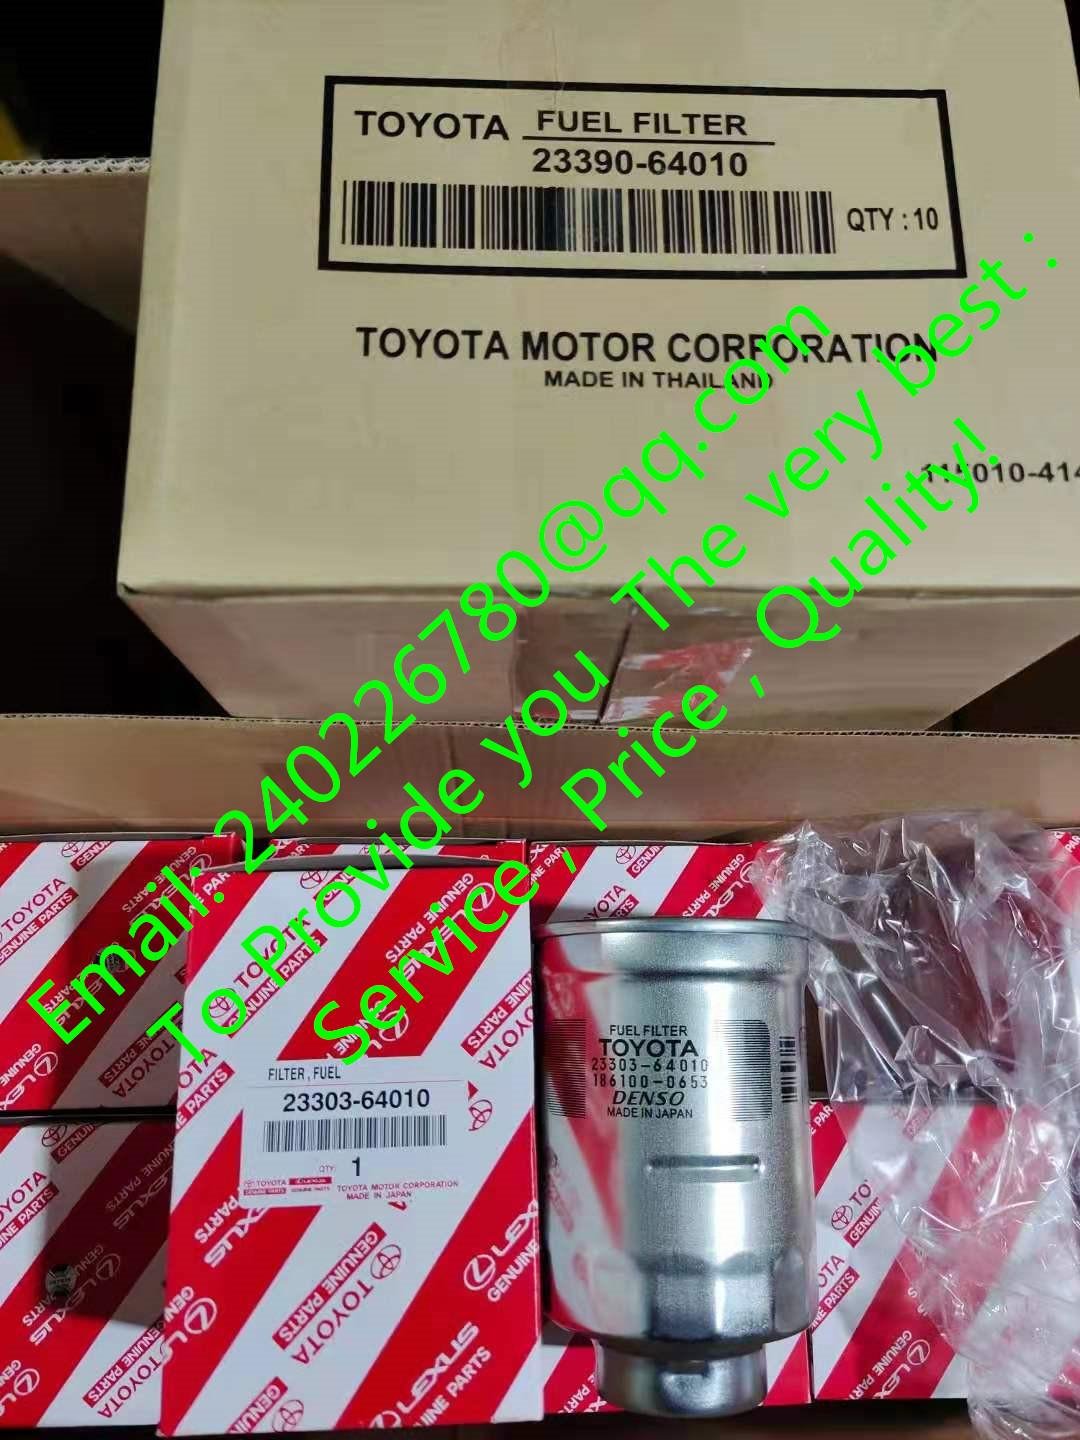 FOR TOYOTA Hilux  Fuel Filter 23303-64010  2330364010 23303-64020  23390-64010   4